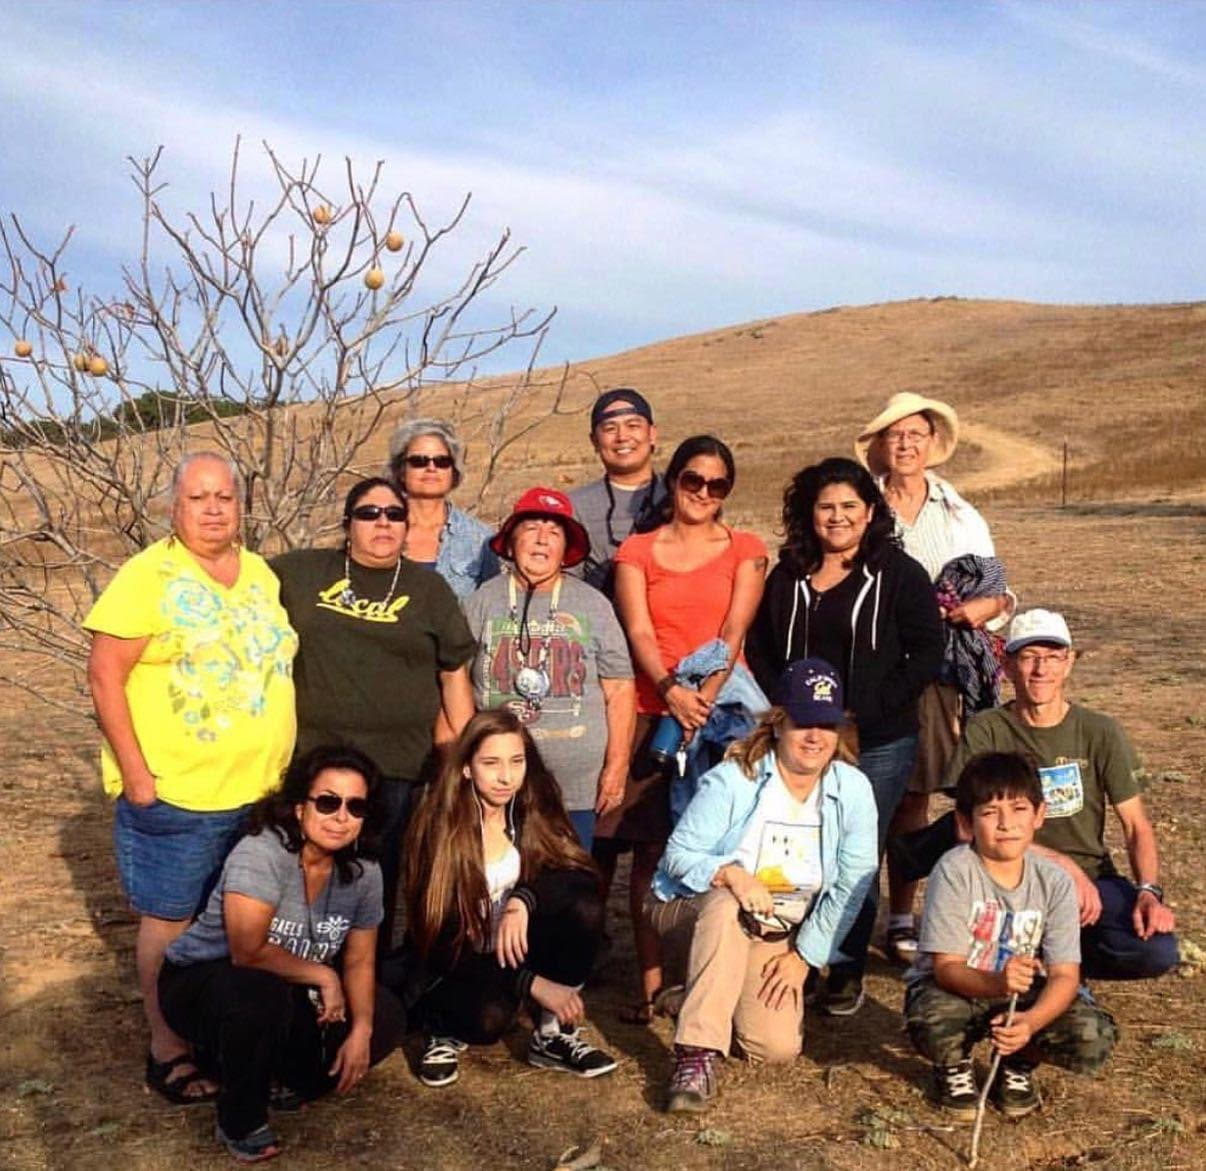 Attendees of the California Indian Conference hike on Bay Miwok land with Indigenous elders and youth and a young California Buckeye tree in the background.